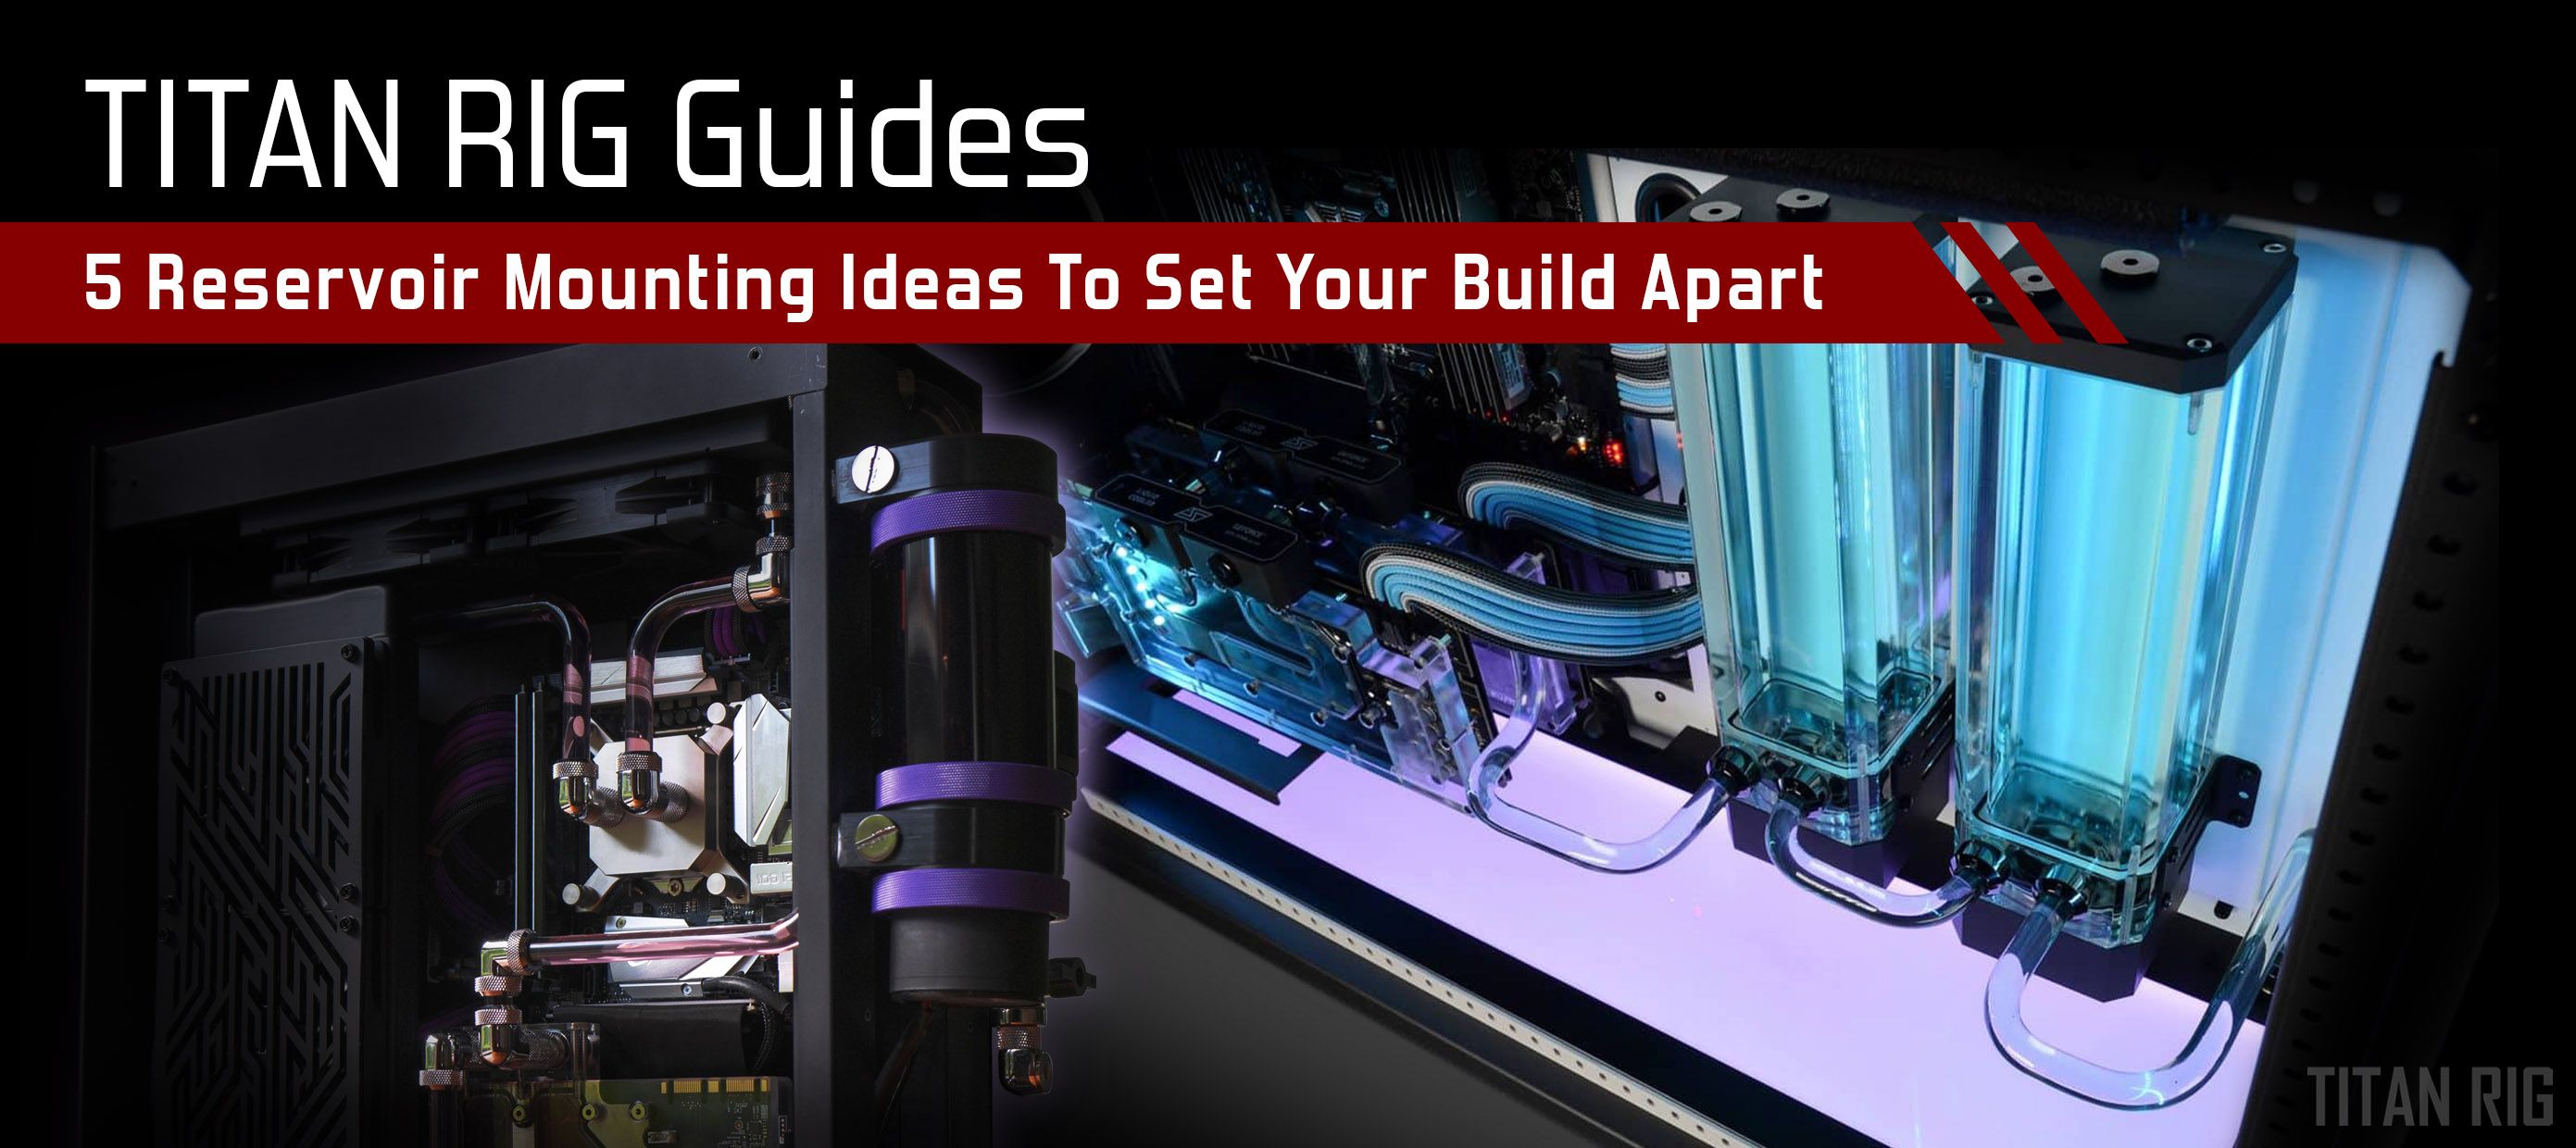 Five Reservoir Mounting Ideas To Set Your Build Apart